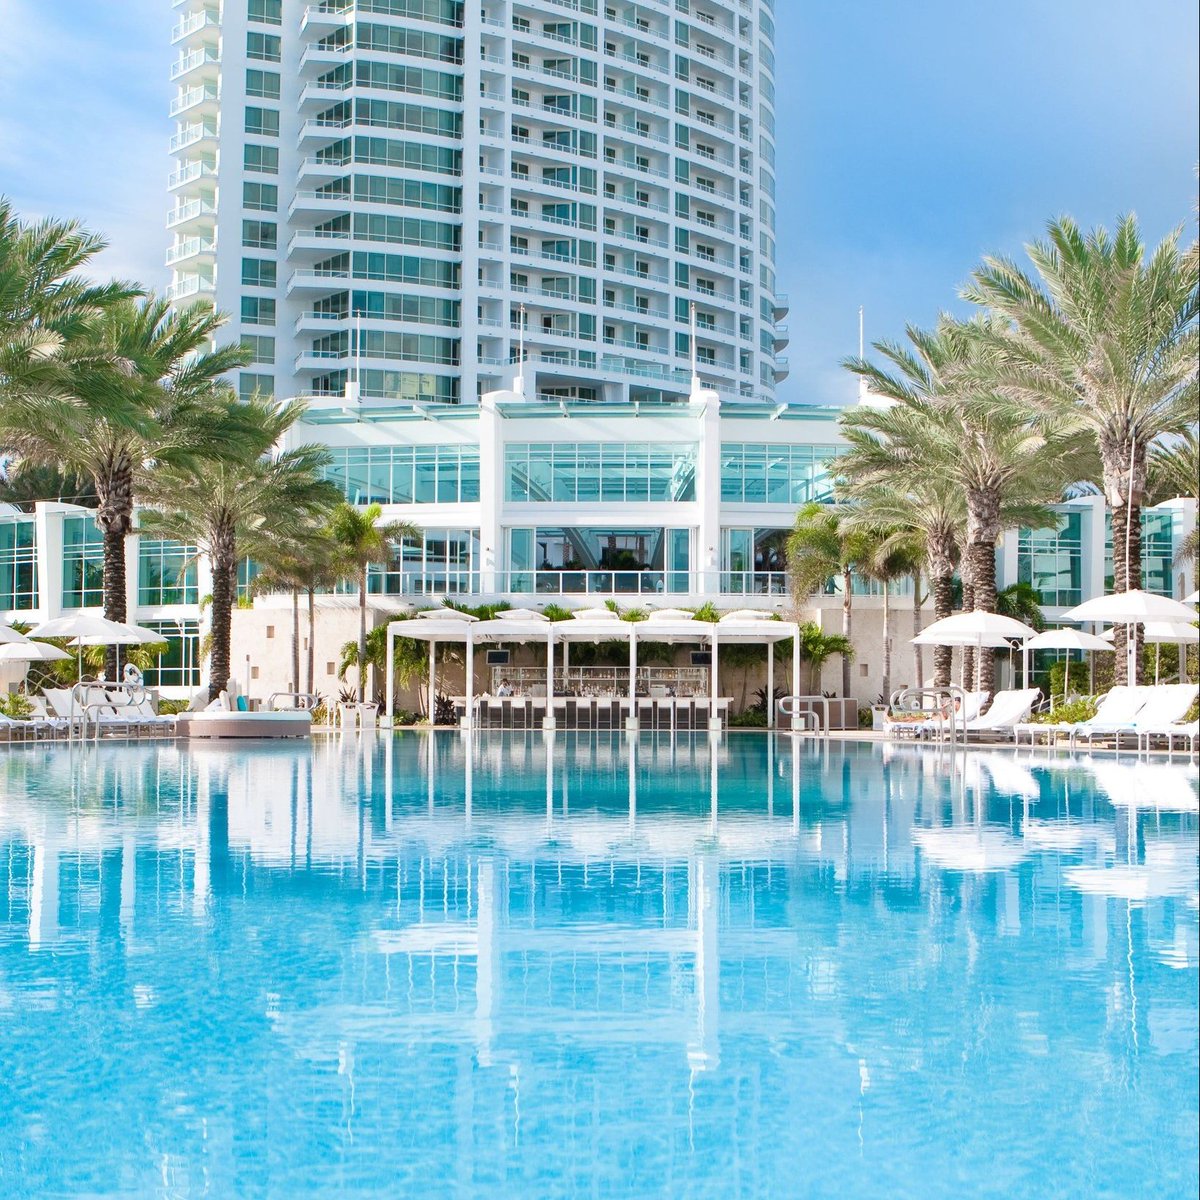 Live it up like the rich and famous at the historic, renowned Fontainebleau Miami Beach! With decades of Hollywood history to its credit, Fontainebleau Miami mixes classic style and modern luxury to create a wildly appealing blend of opulent experiences: gaytravel.com/gay-friendly-h…